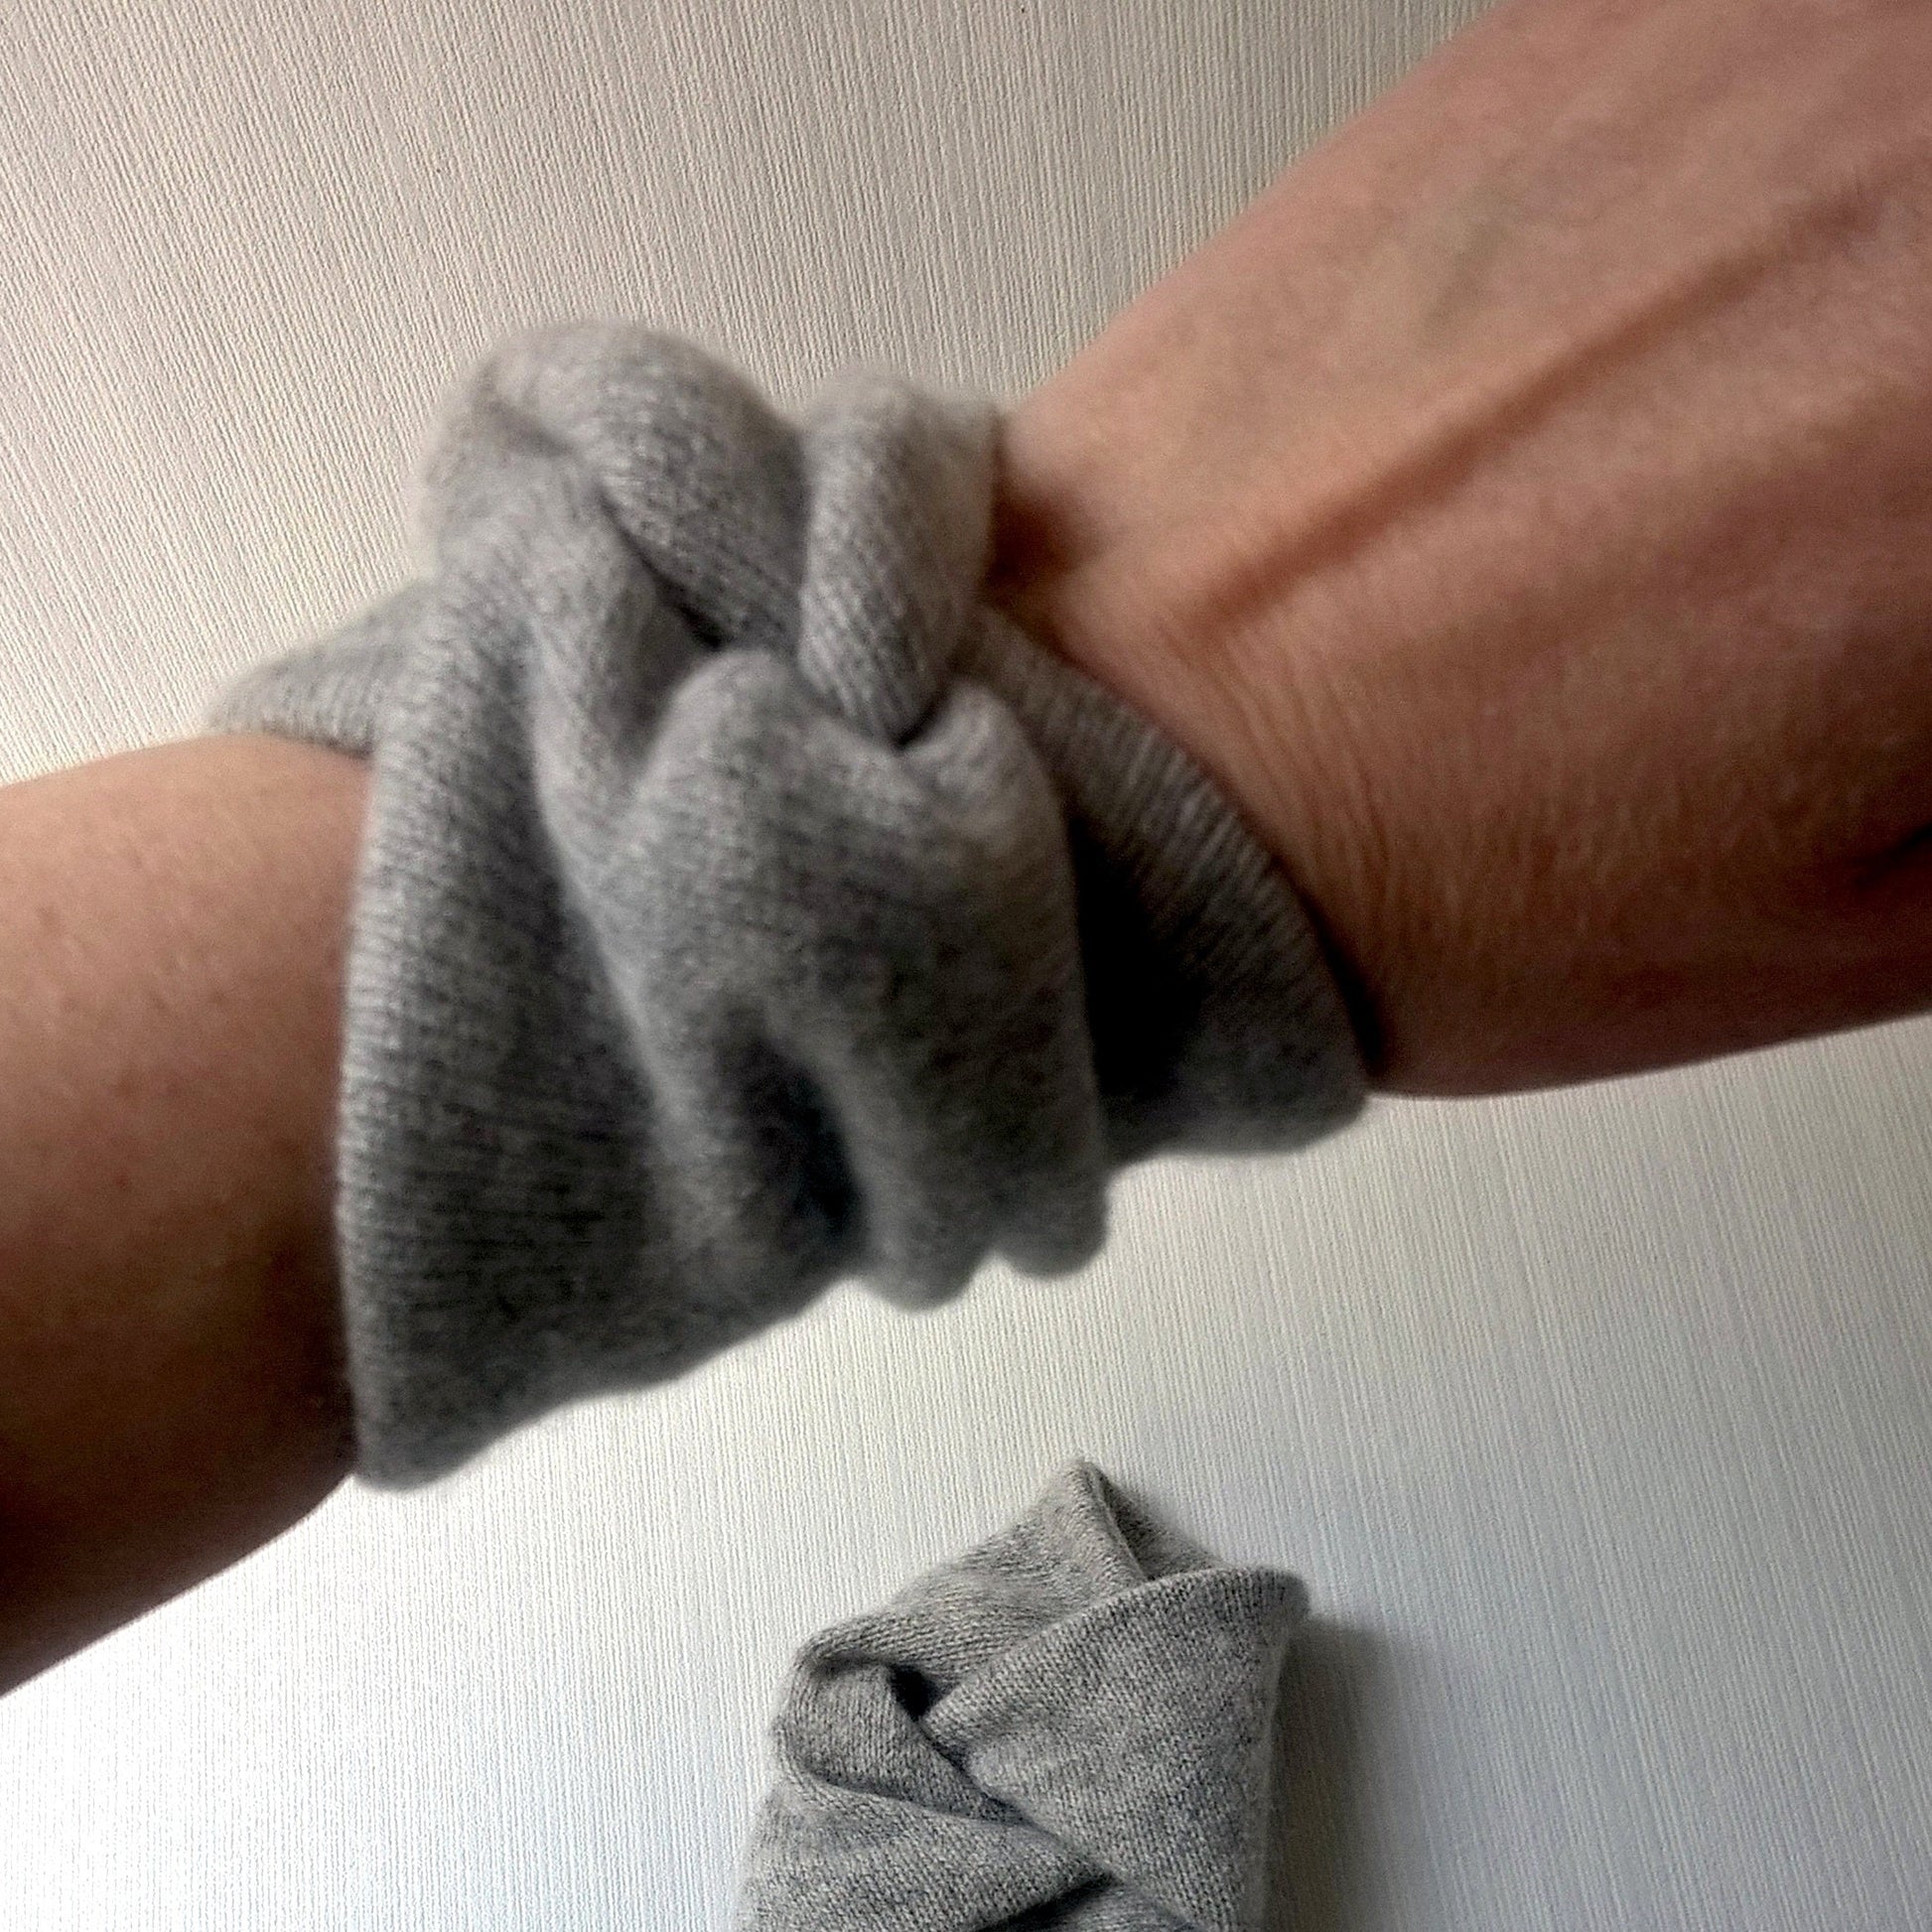 Keeping the pulse point on the wrists warm raises overall body temperature.